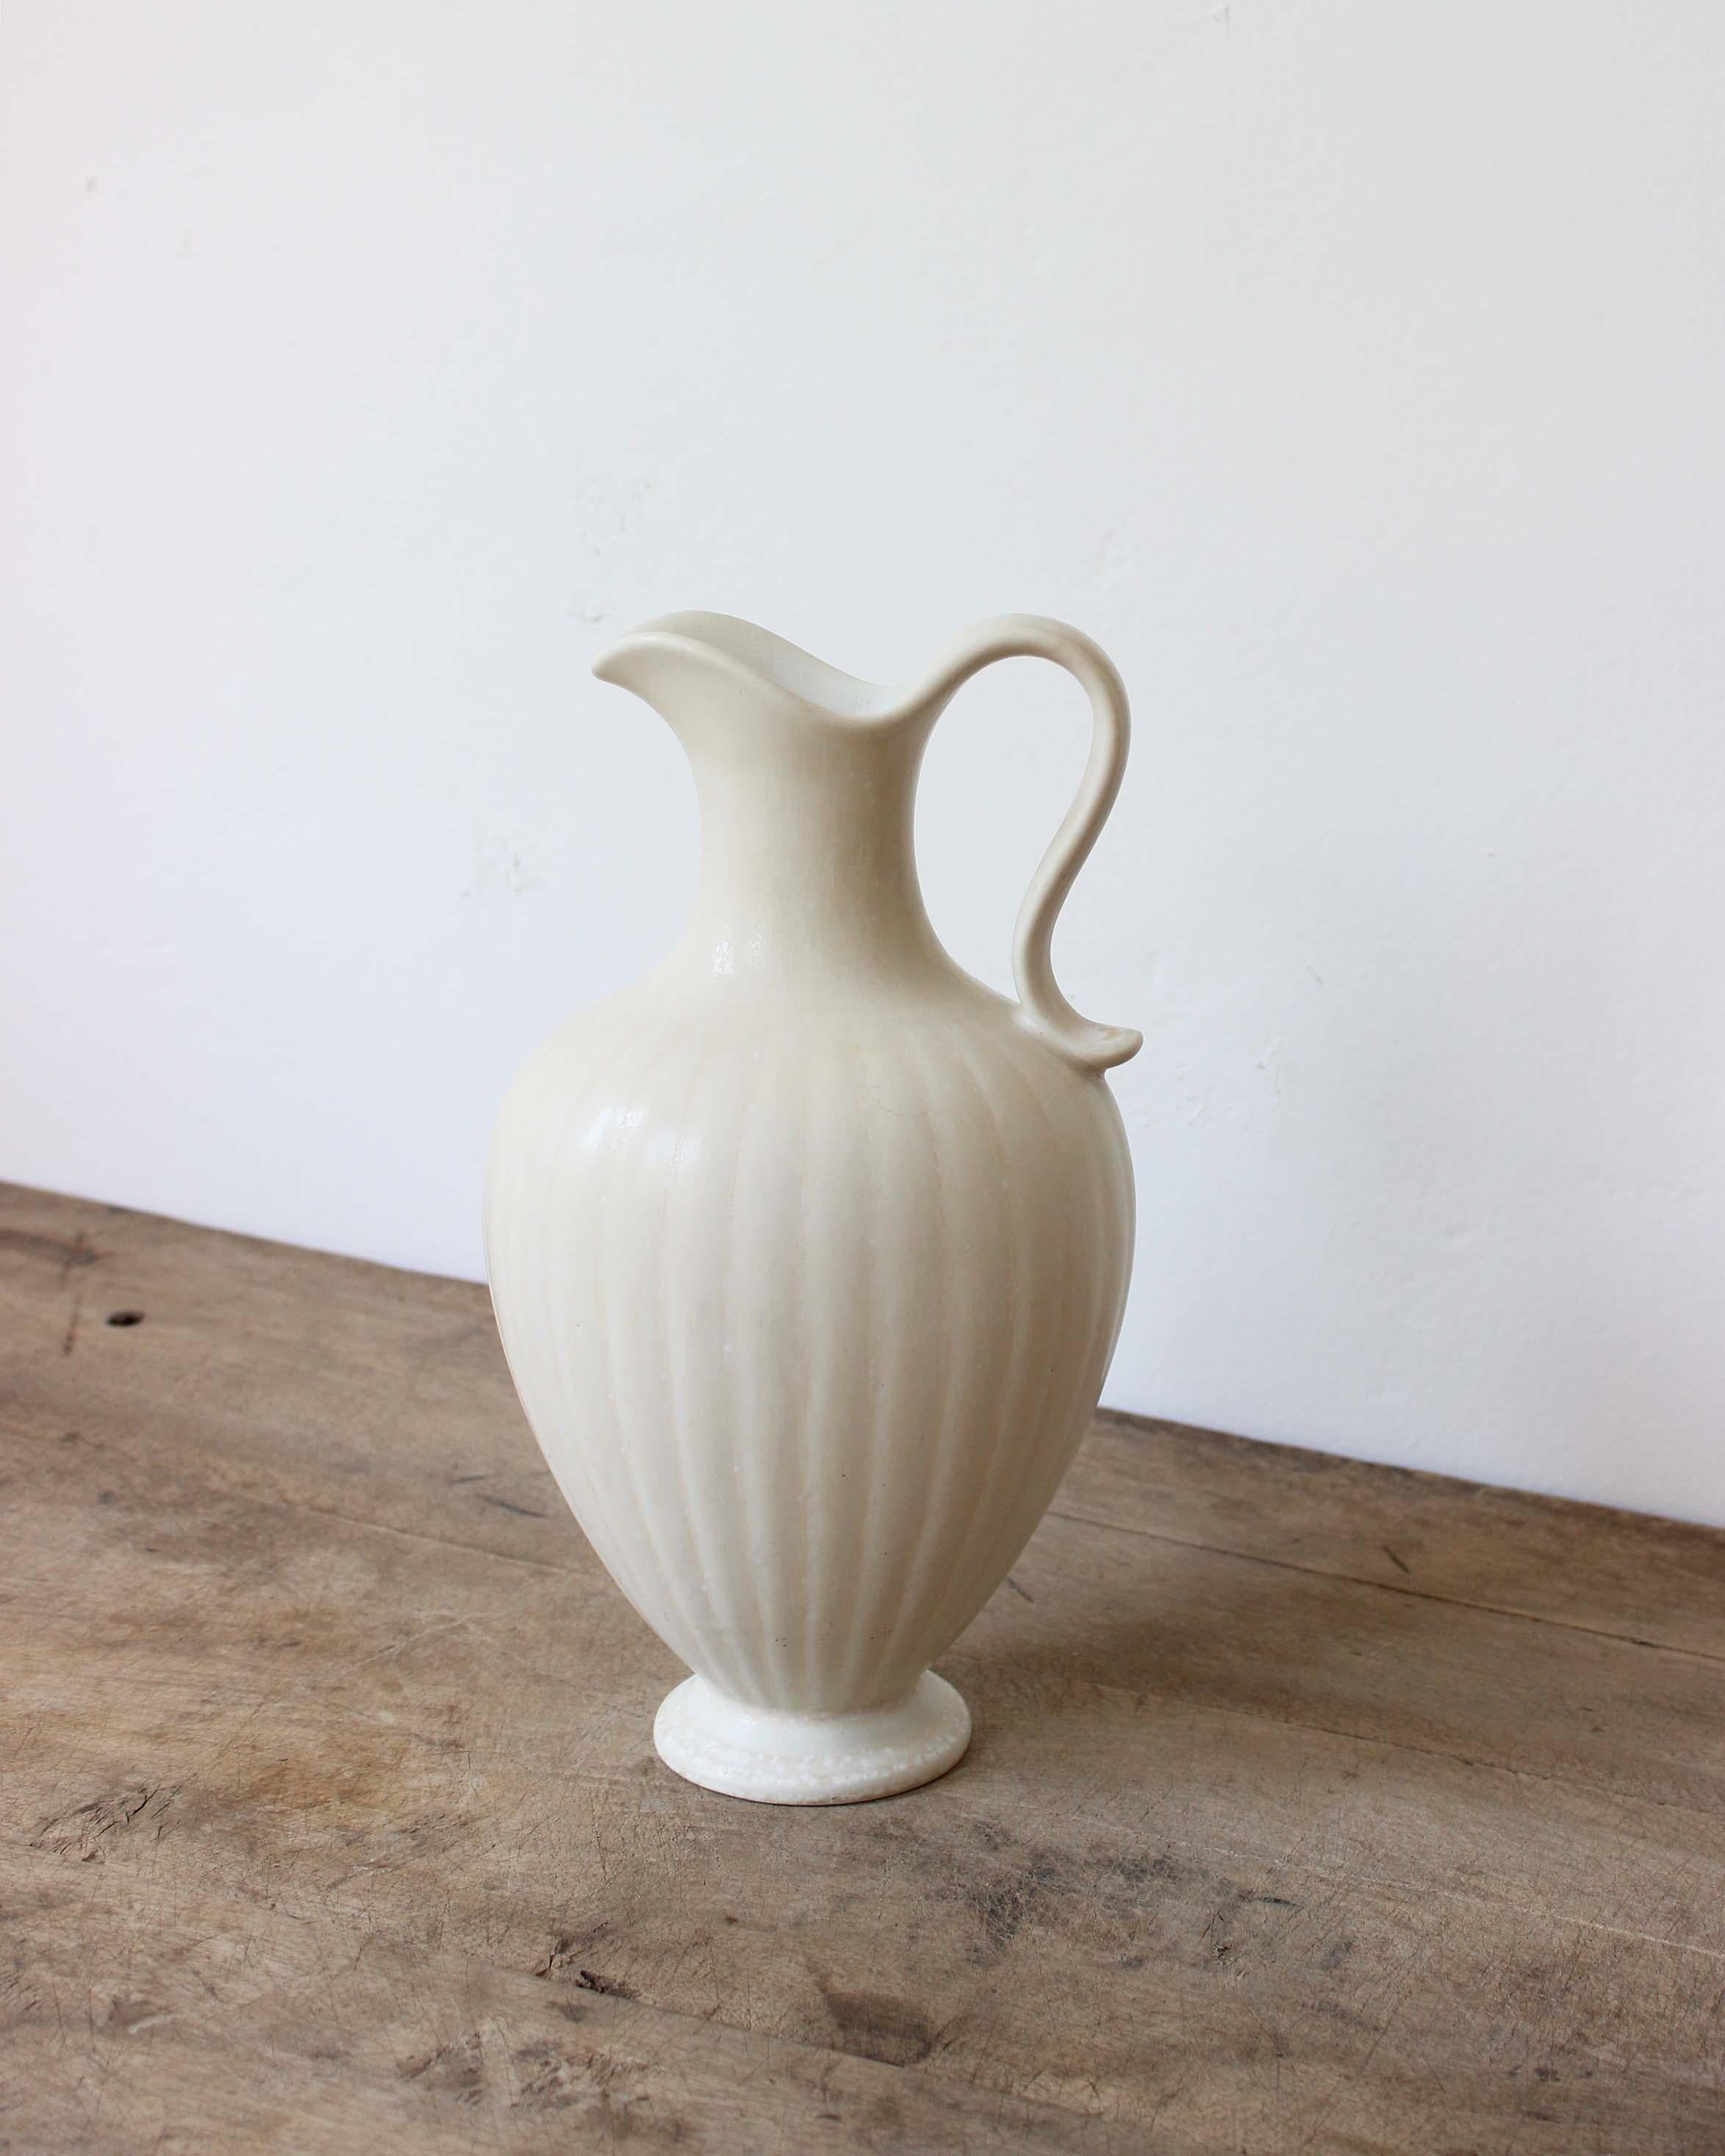 Impeccable stoneware pitcher produced by Rörstrands, Sweden, 1940s. Designed and signed by Gunnar Nylund, (Swedish, 1914-1997).

Nylund served as artistic director at Rörstrands, where he worked 1931-1955. Prior to his work at Rörstrand he was a